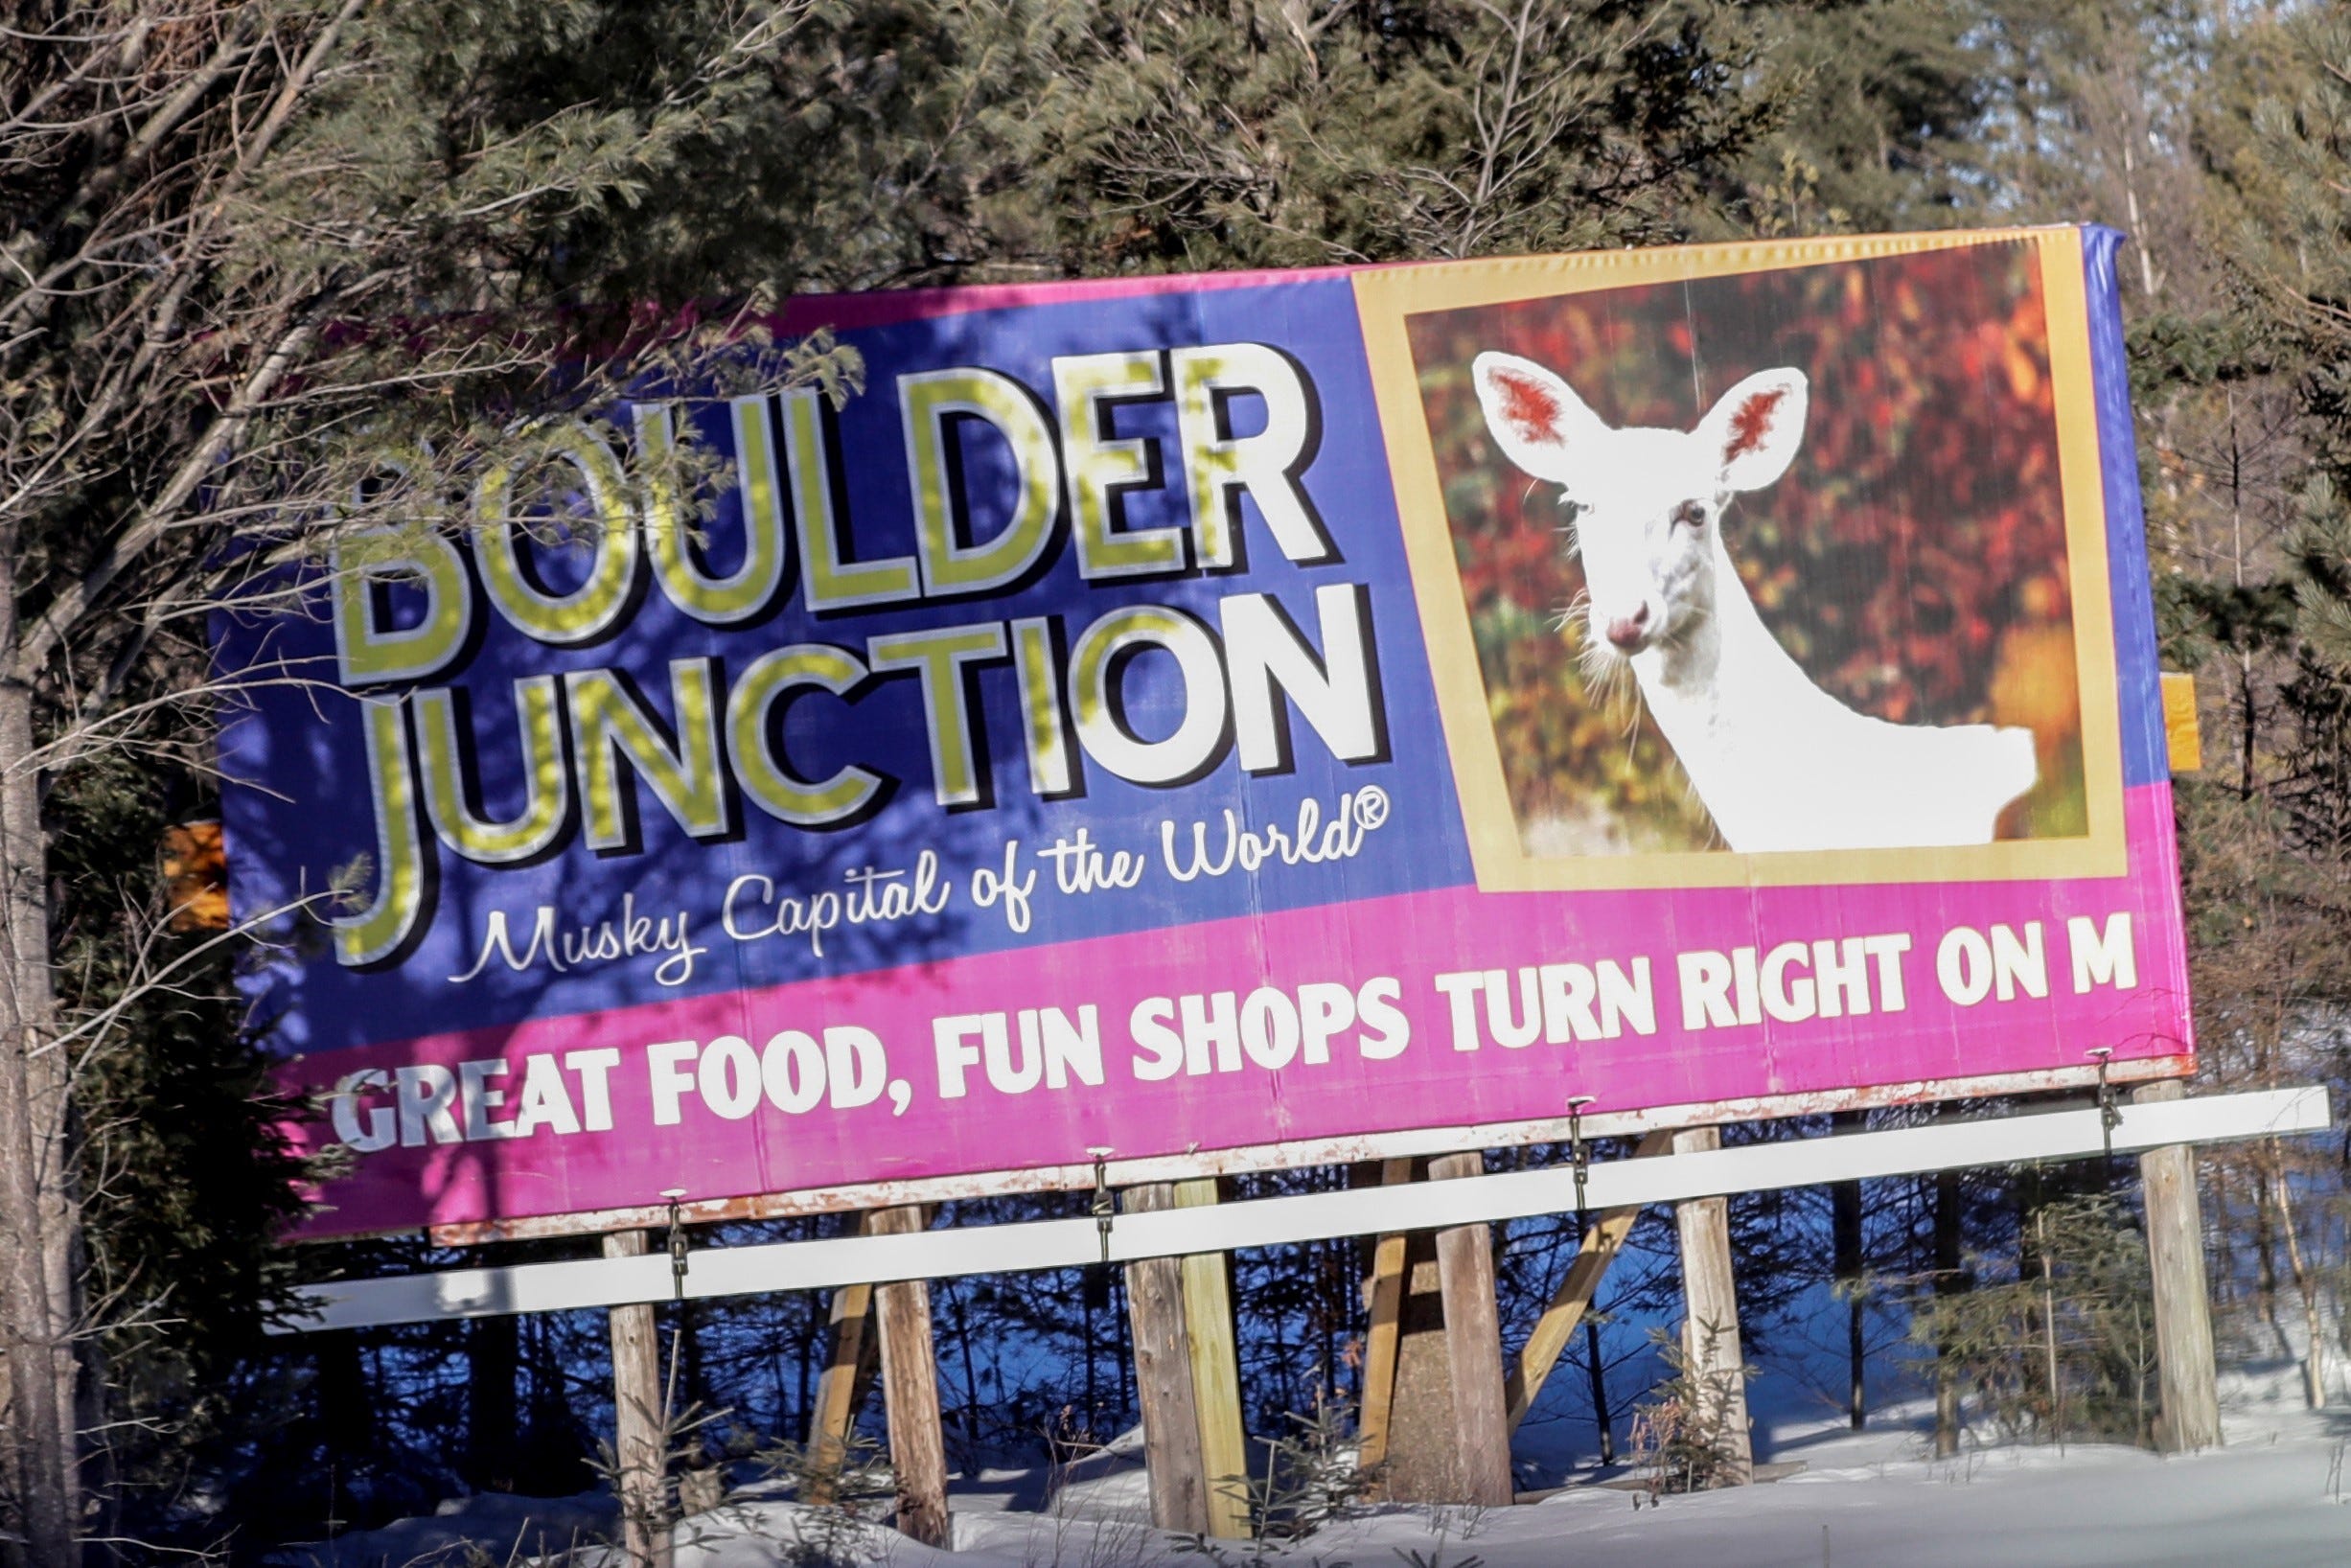 A billboard along U.S. 51 near Woodruff on Feb. 14 showcases a white deer to help promote tourism in Boulder Junction.